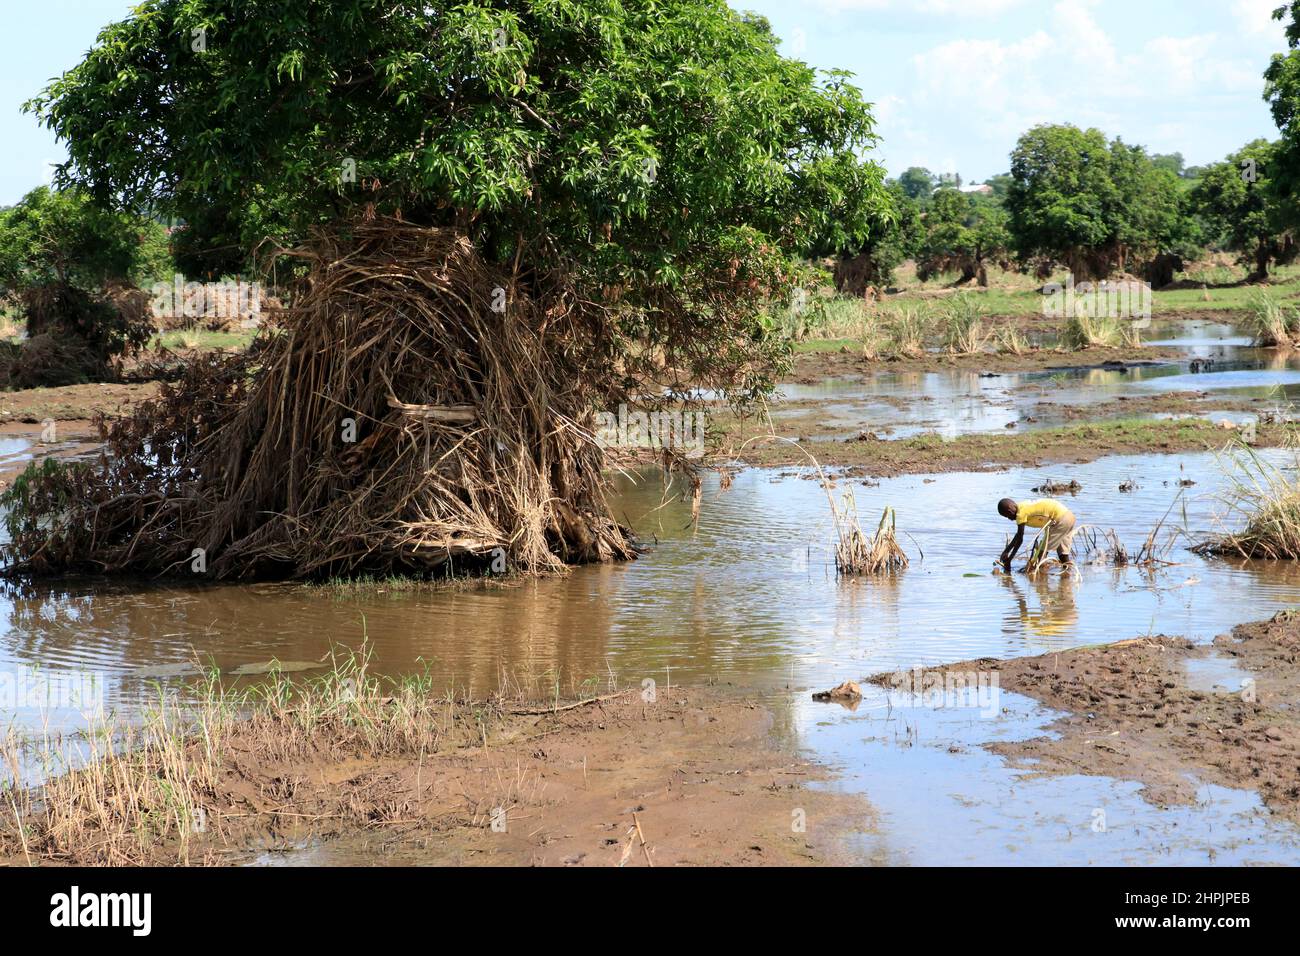 A man is seen walking in flood waters in Chikwawa district Malawi. The floods were caused by Tropical Cyclone ana. Malawi. Stock Photo